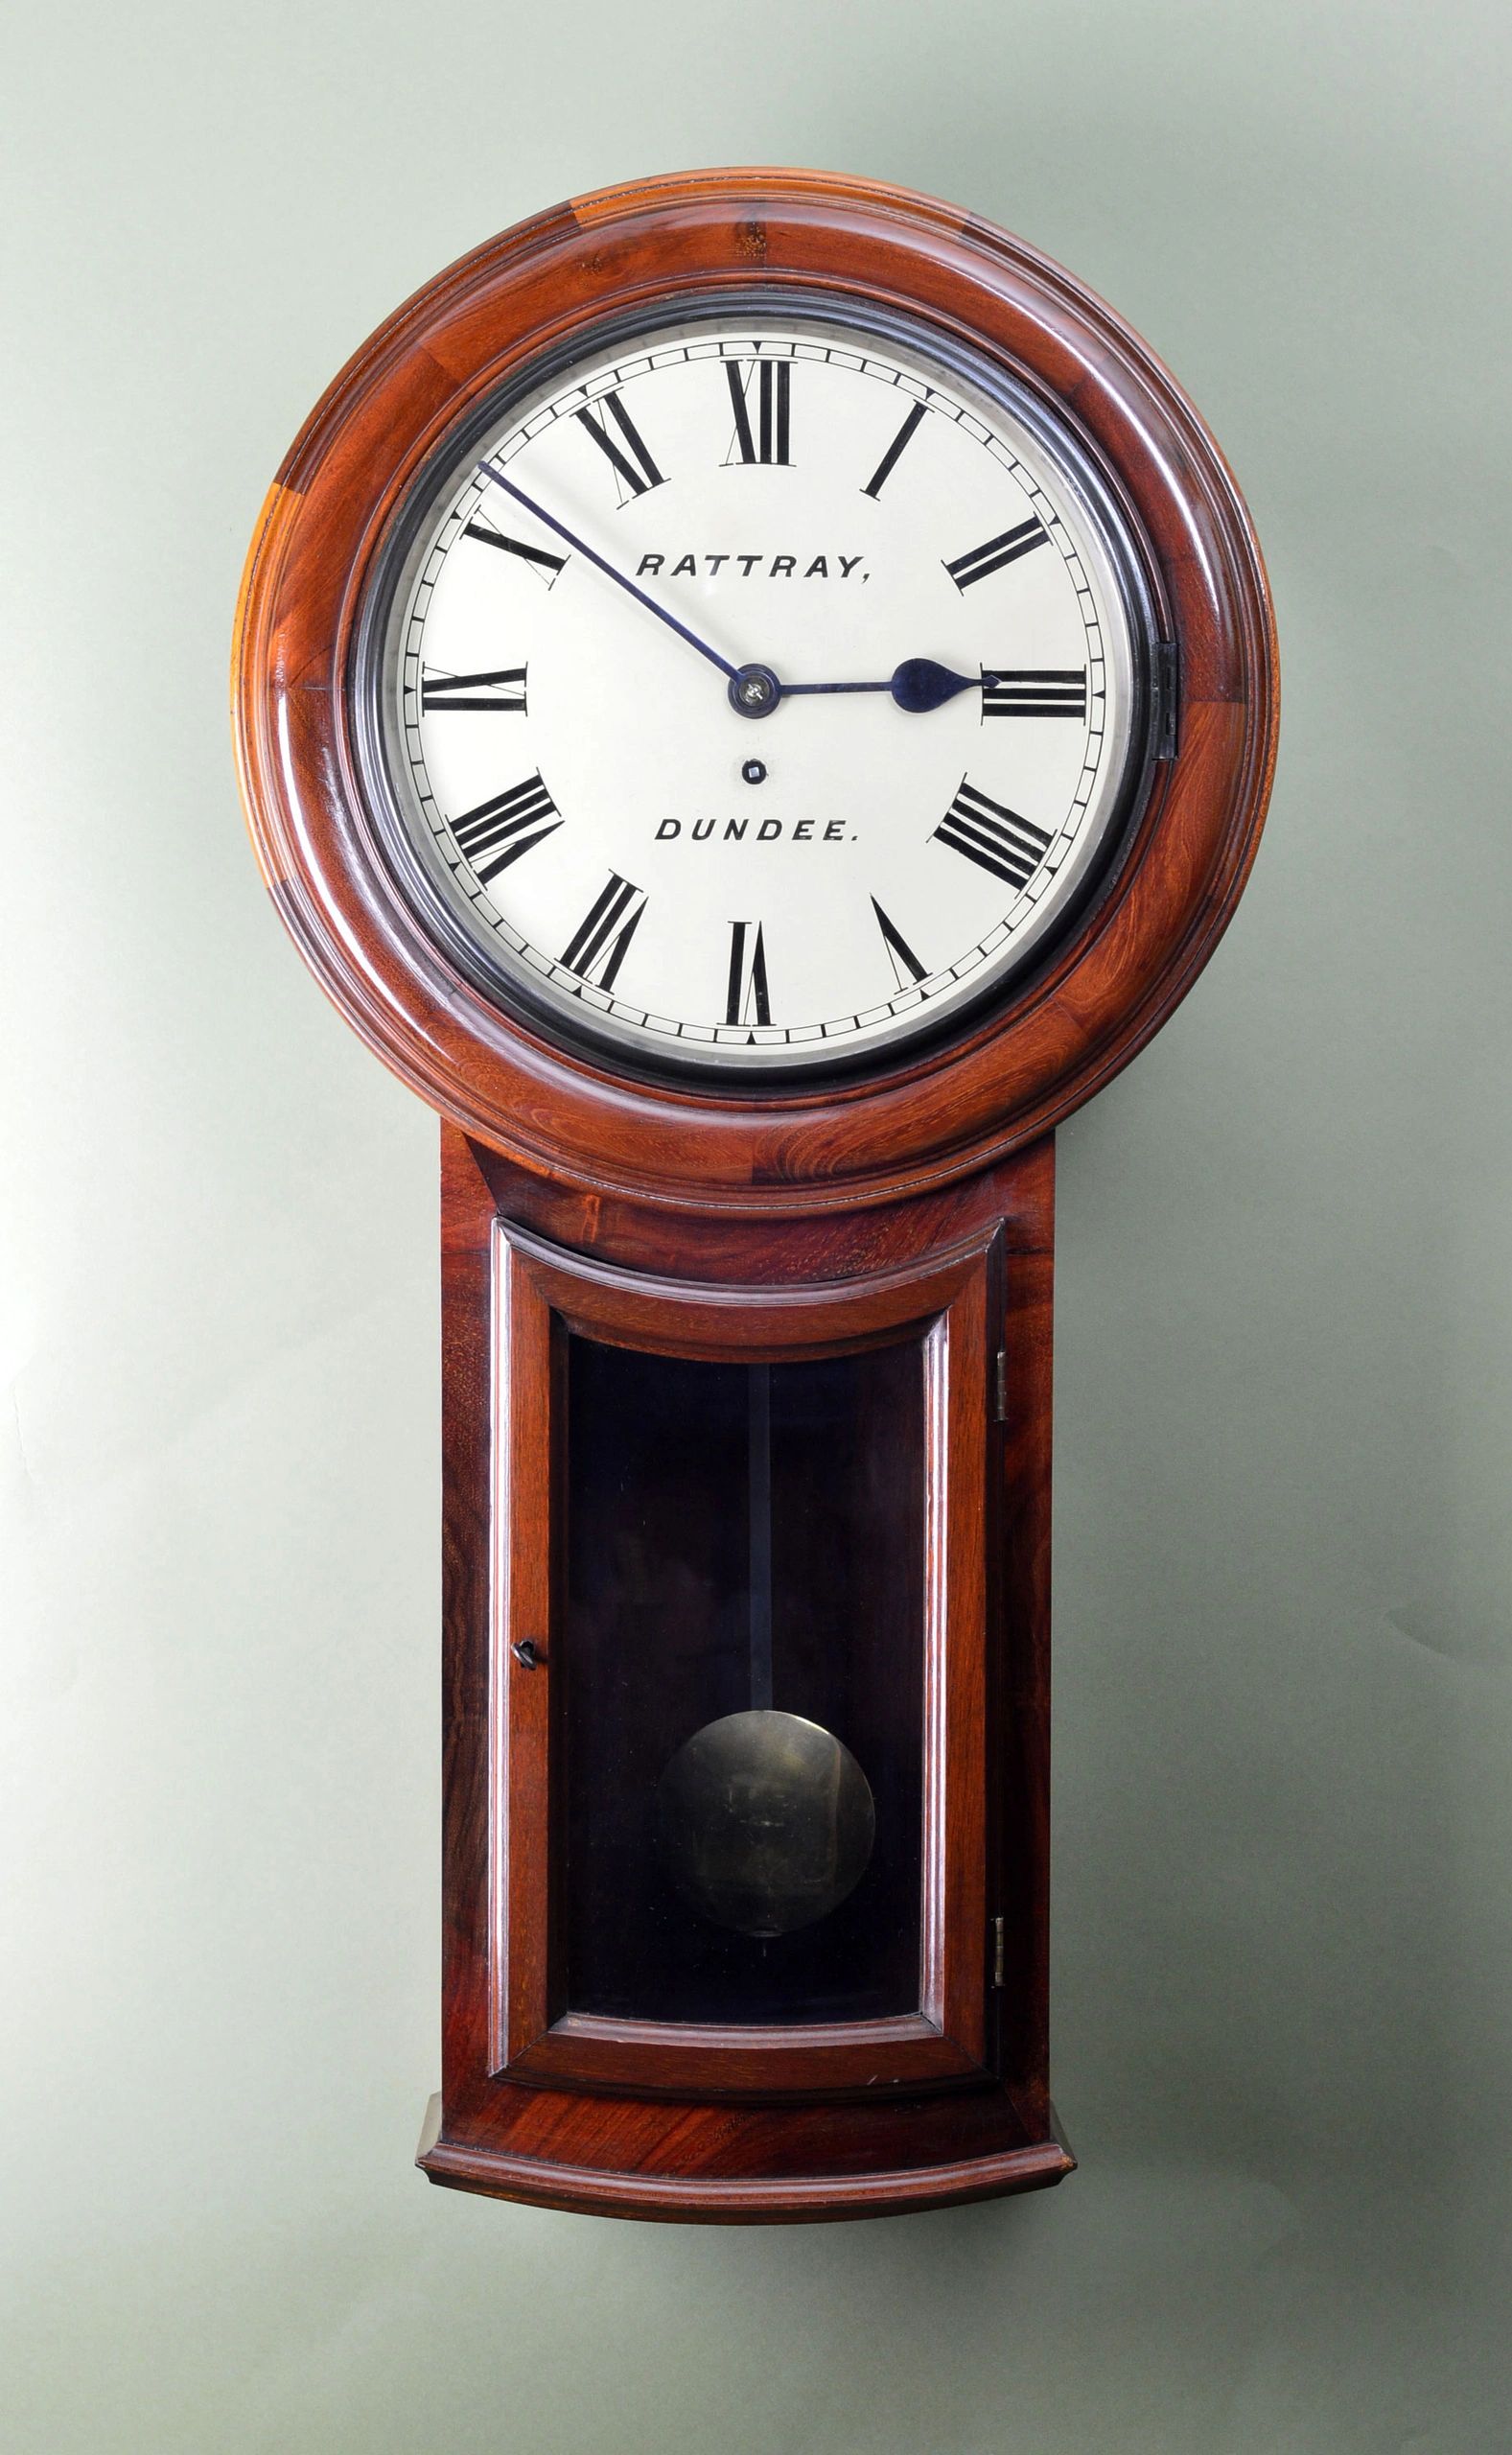 scottish antique wall clock by rattray of dundee